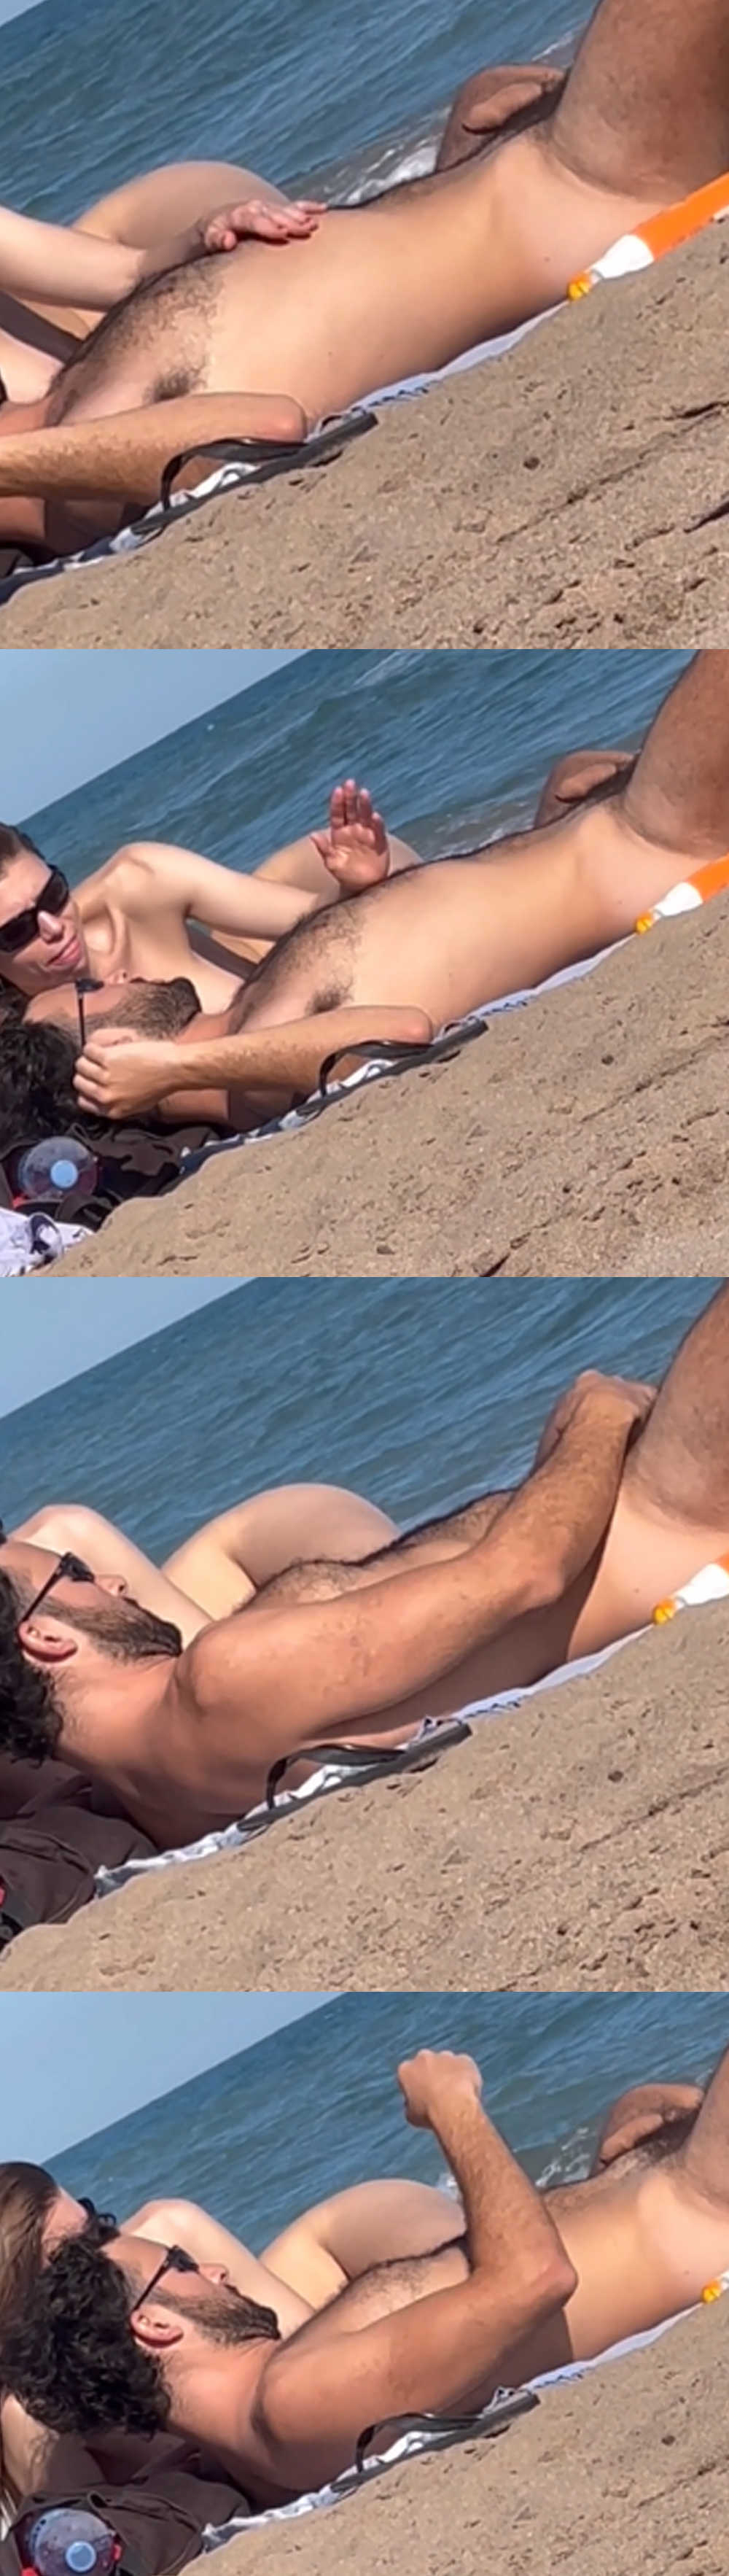 straight nudist man caught by spy camera at the beach